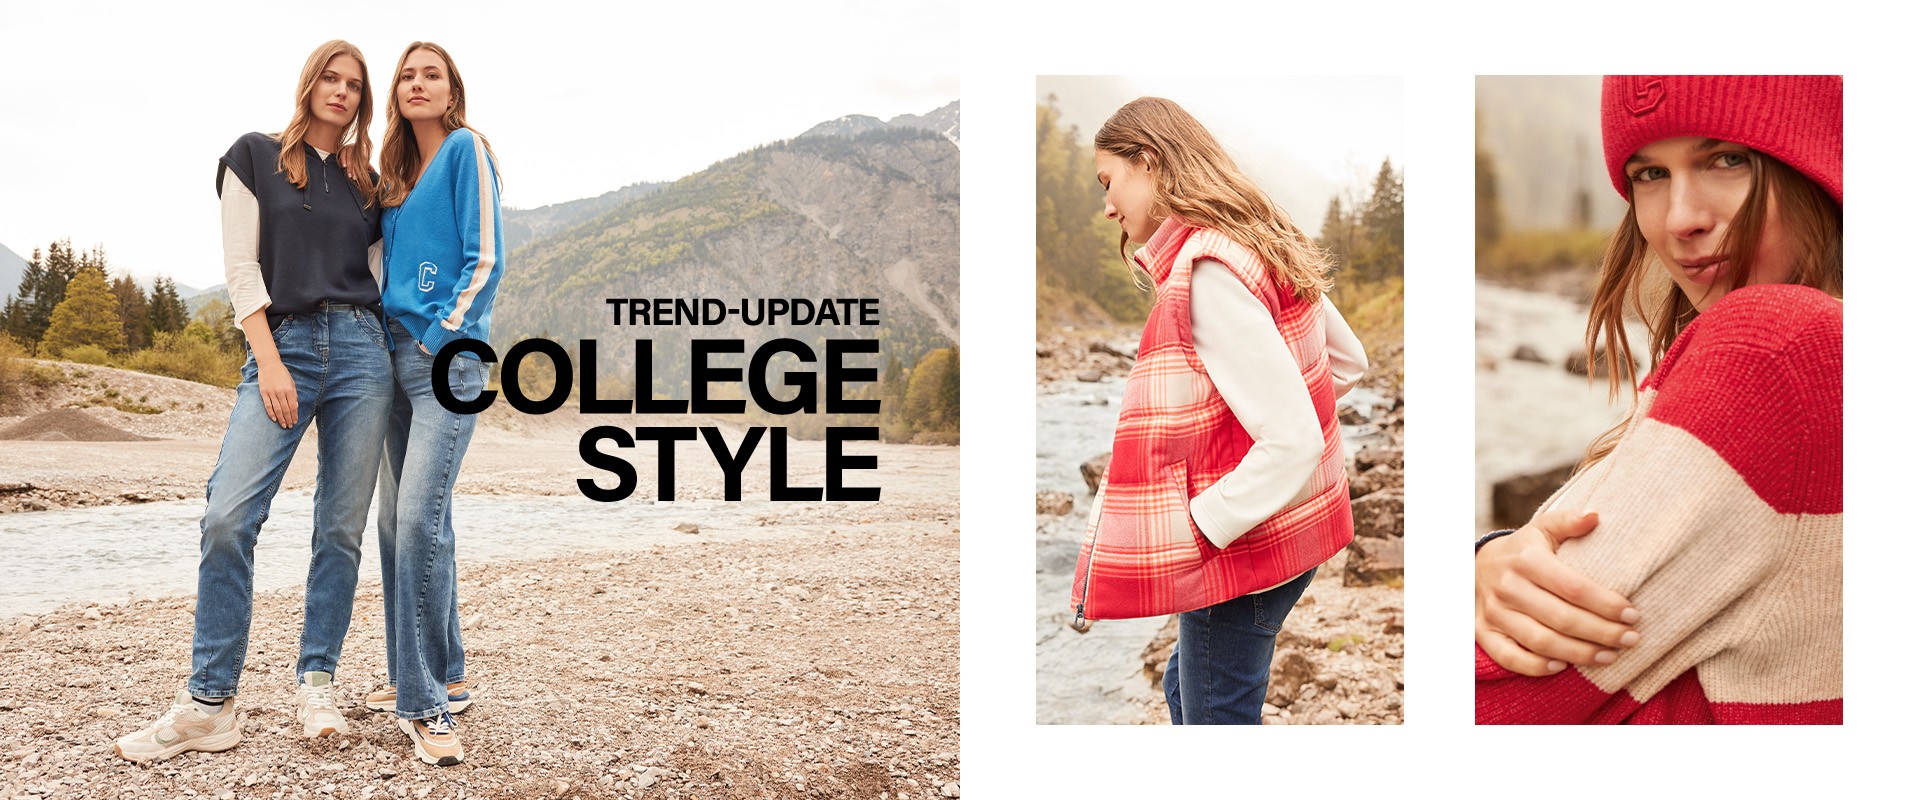 Trend-update: college style